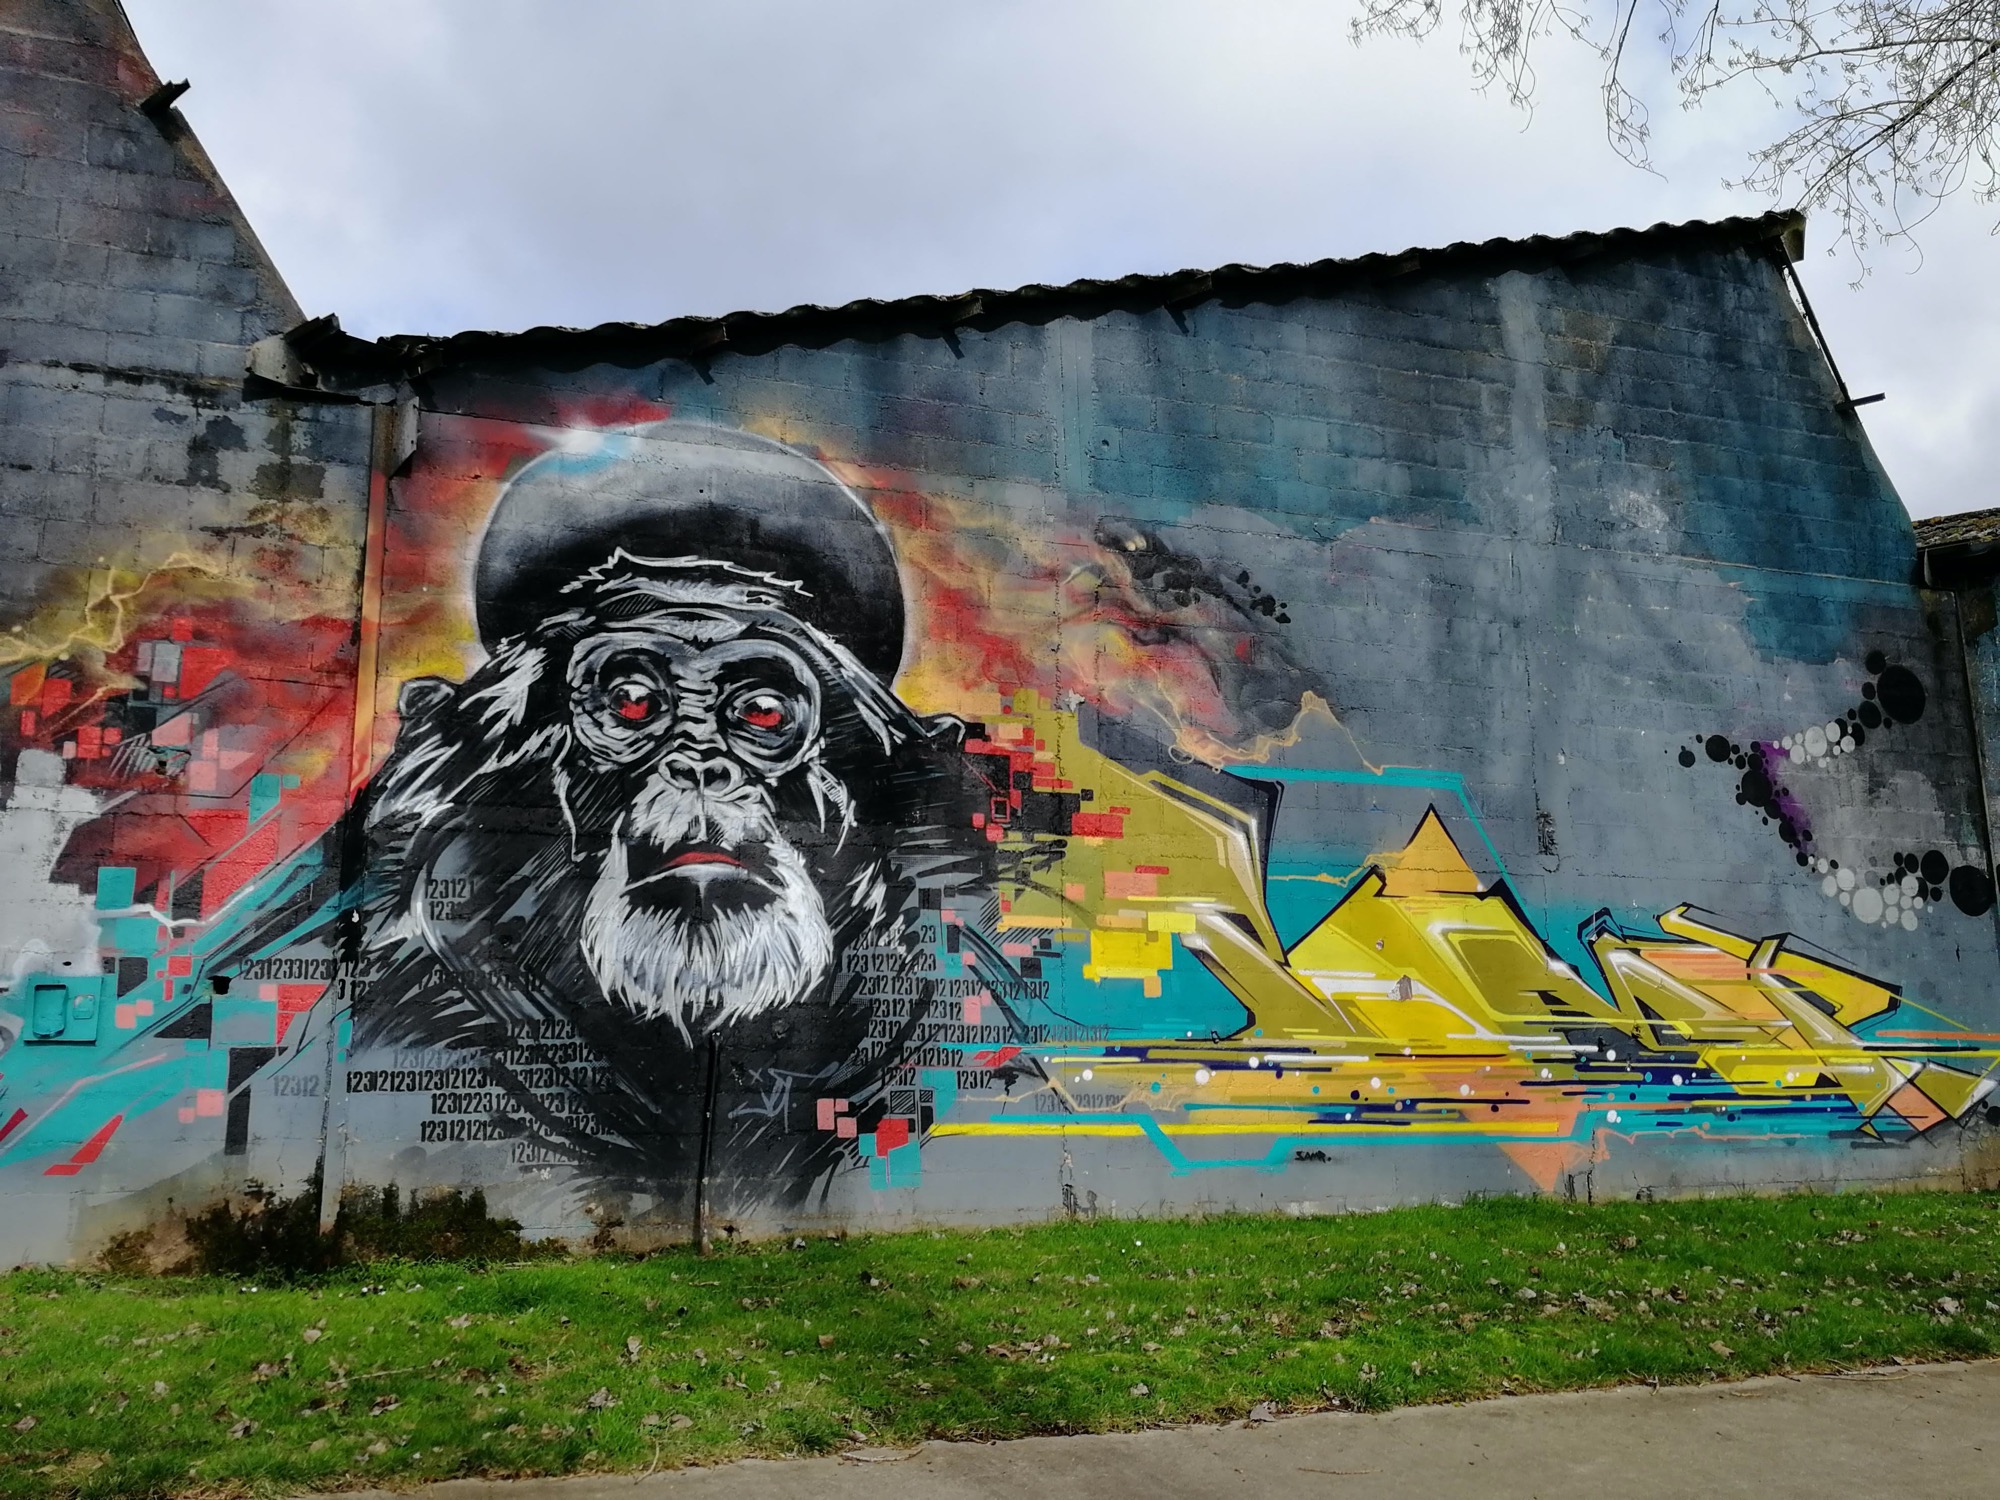 Graffiti 1210  captured by Rabot in Redon France